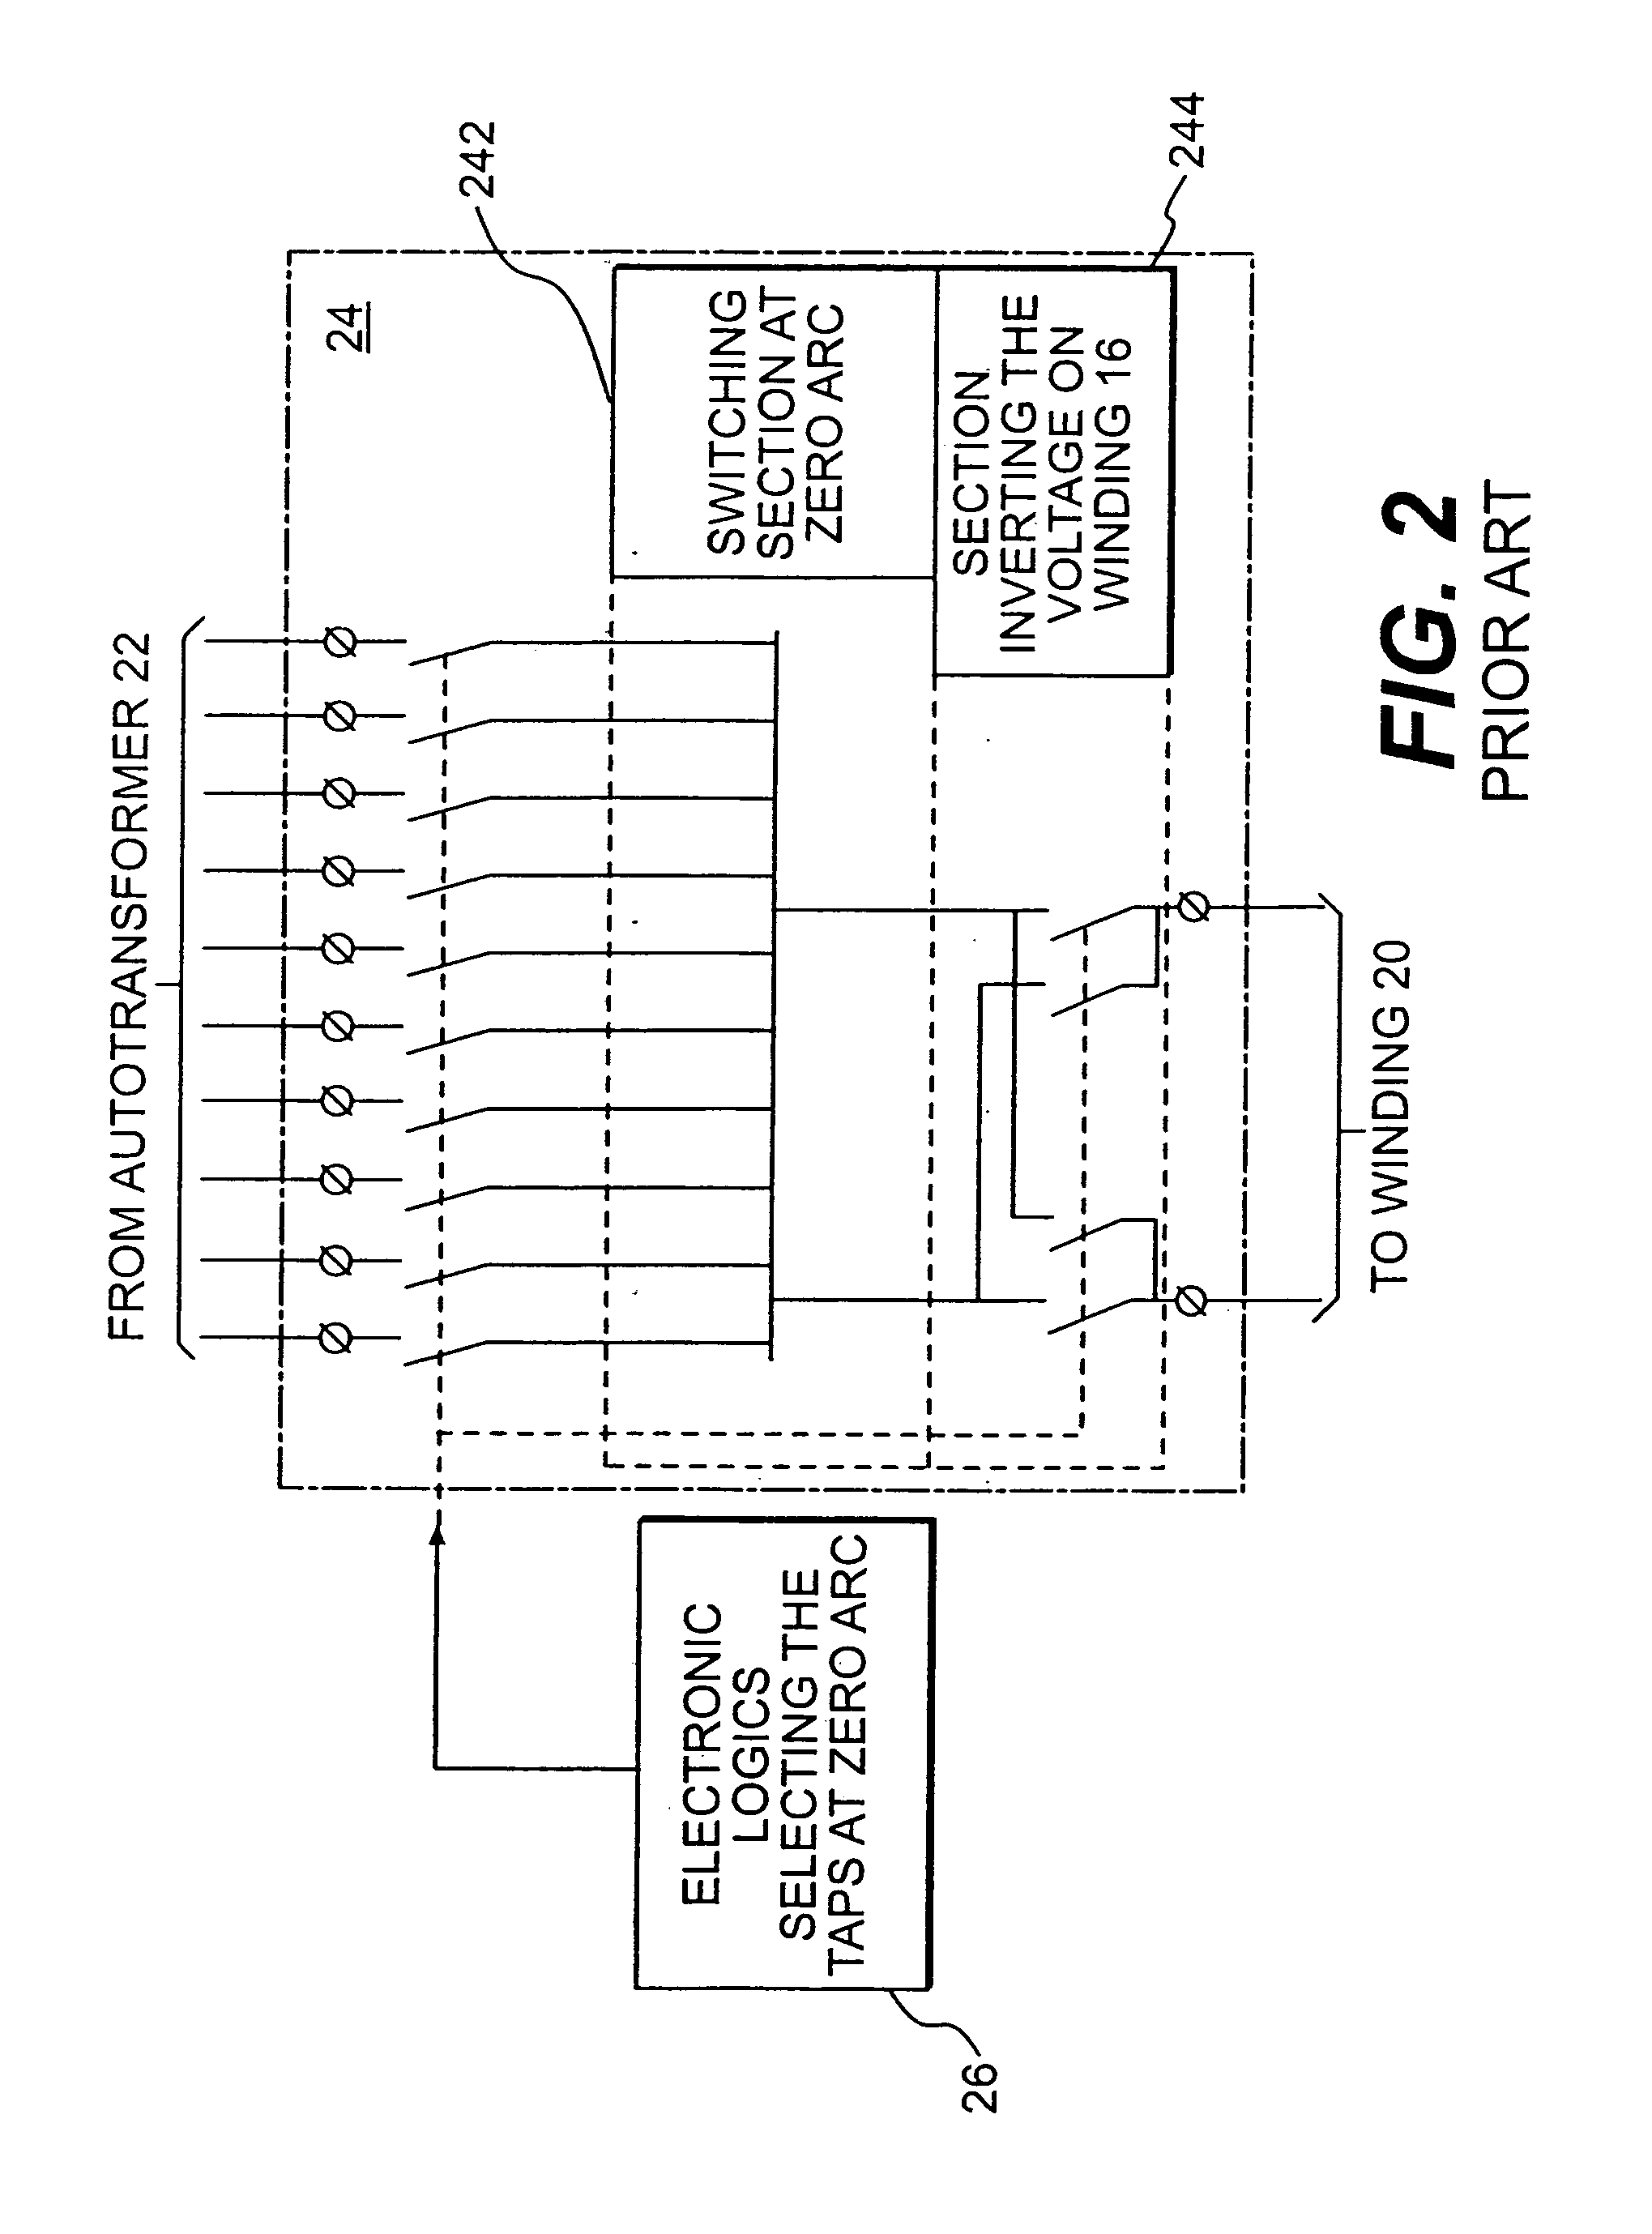 Electrical power distribution system for street lighting